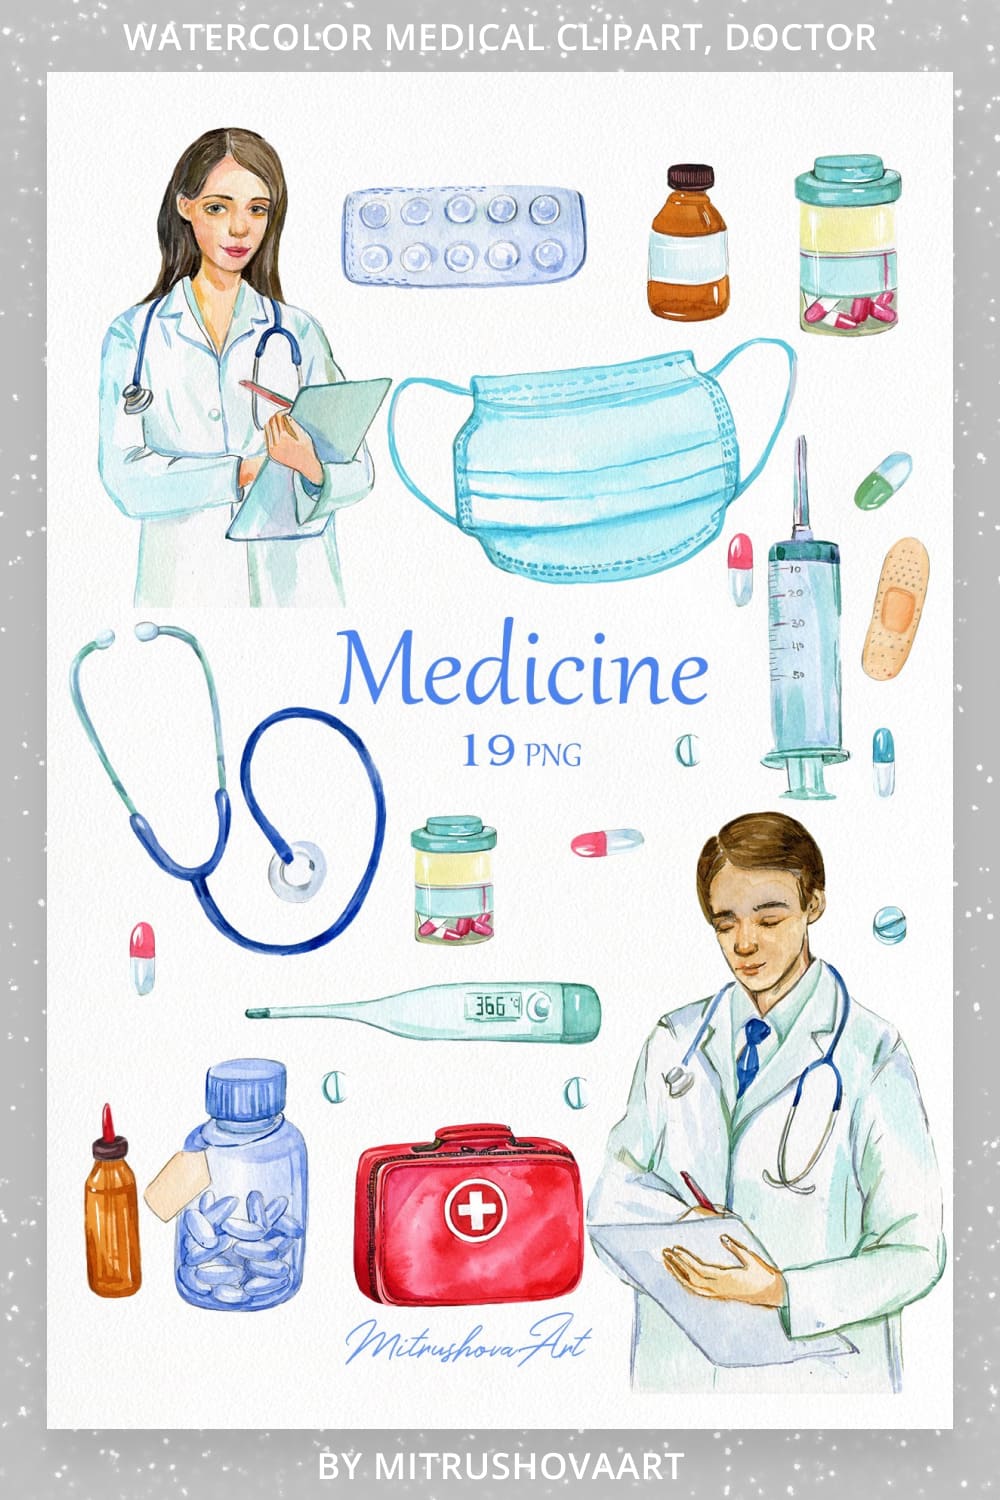 watercolor medical clipart doctor pinterest image.